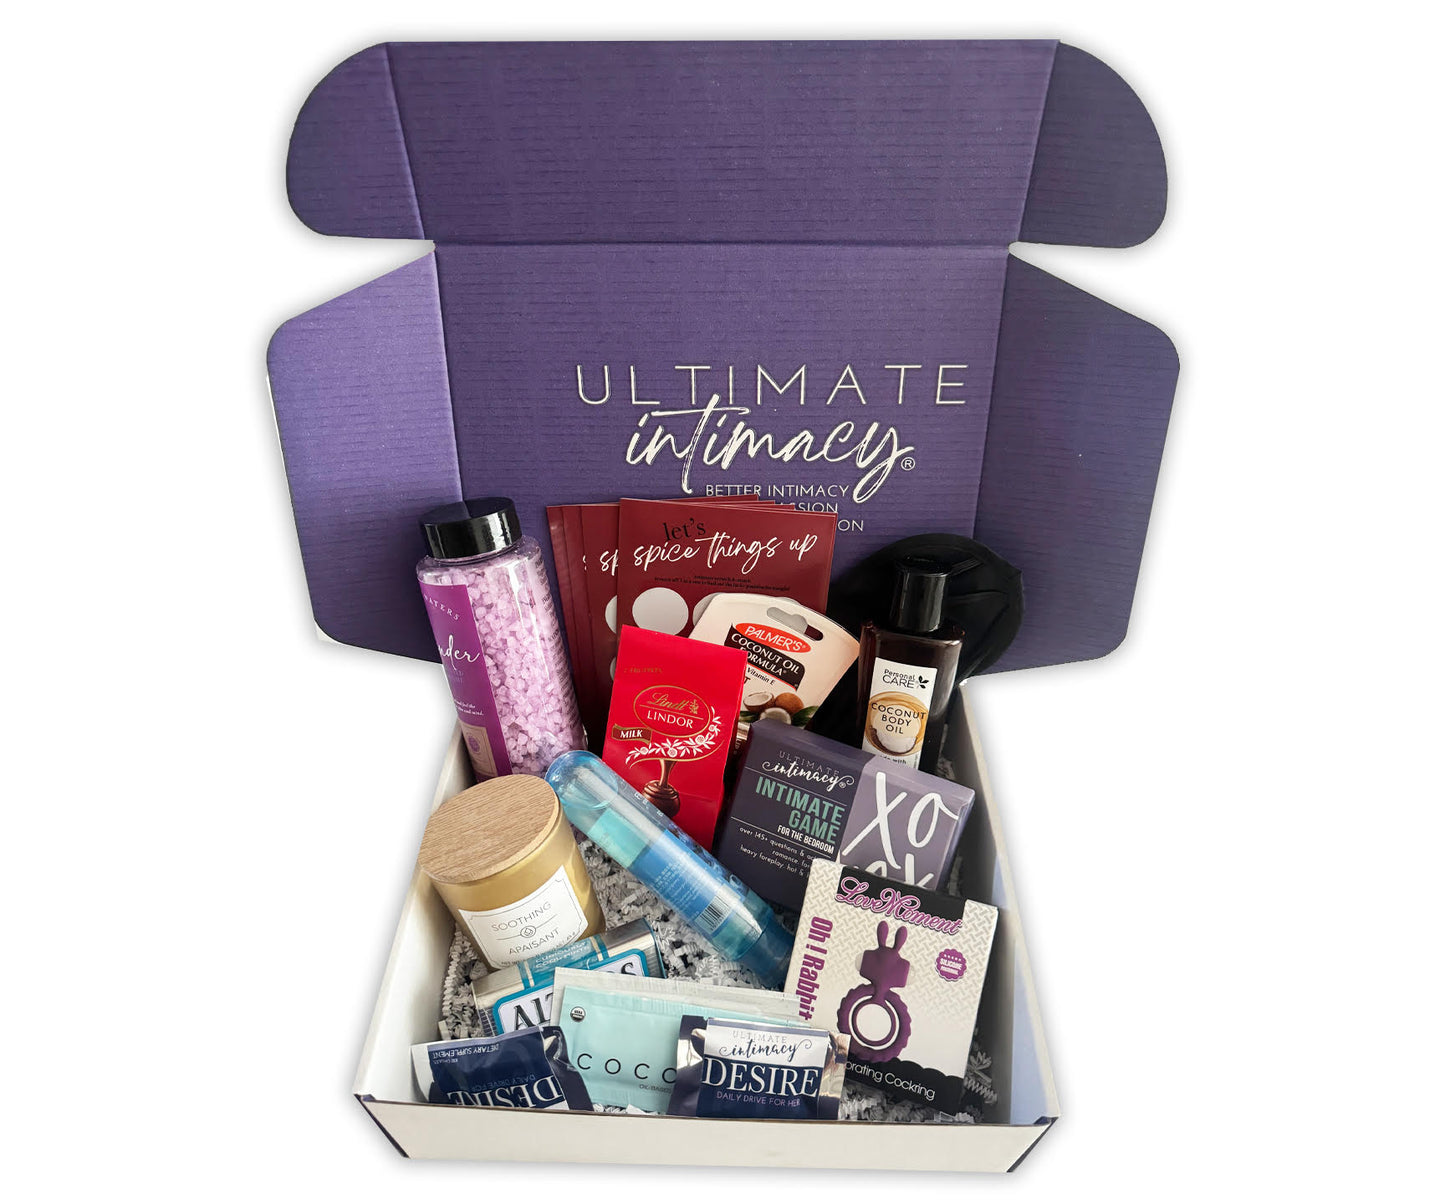 The Ultimate Intimacy Box